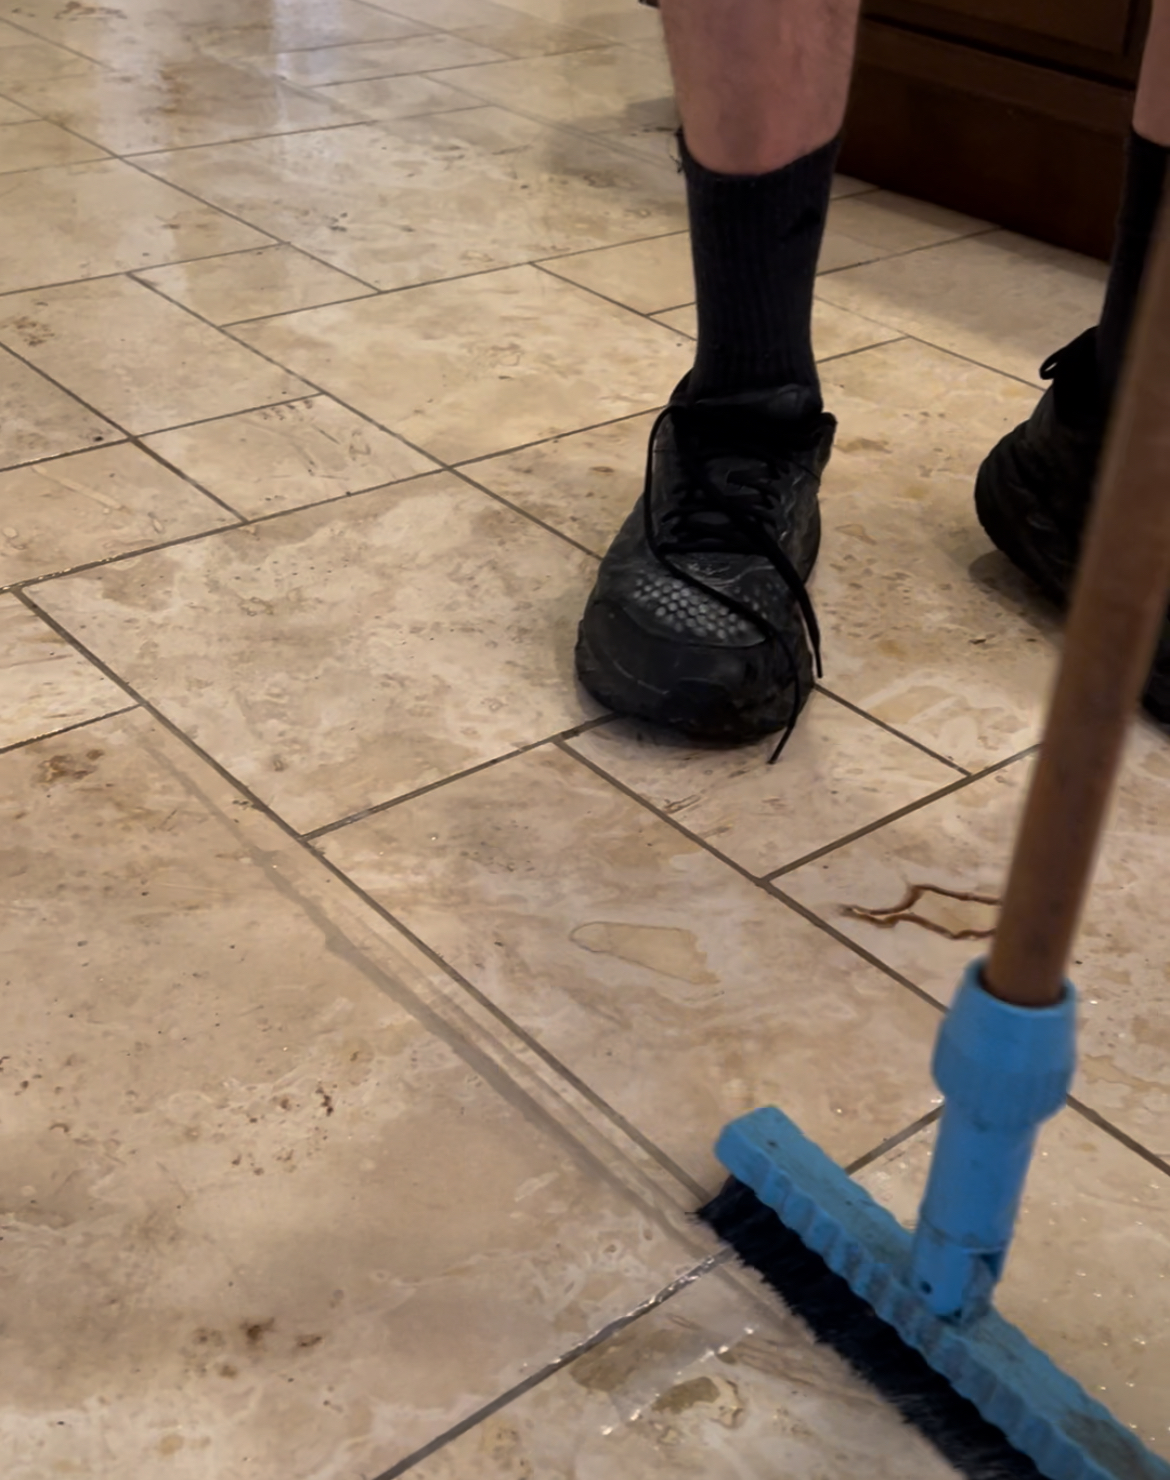 Cleaning tavertine tile grout lines